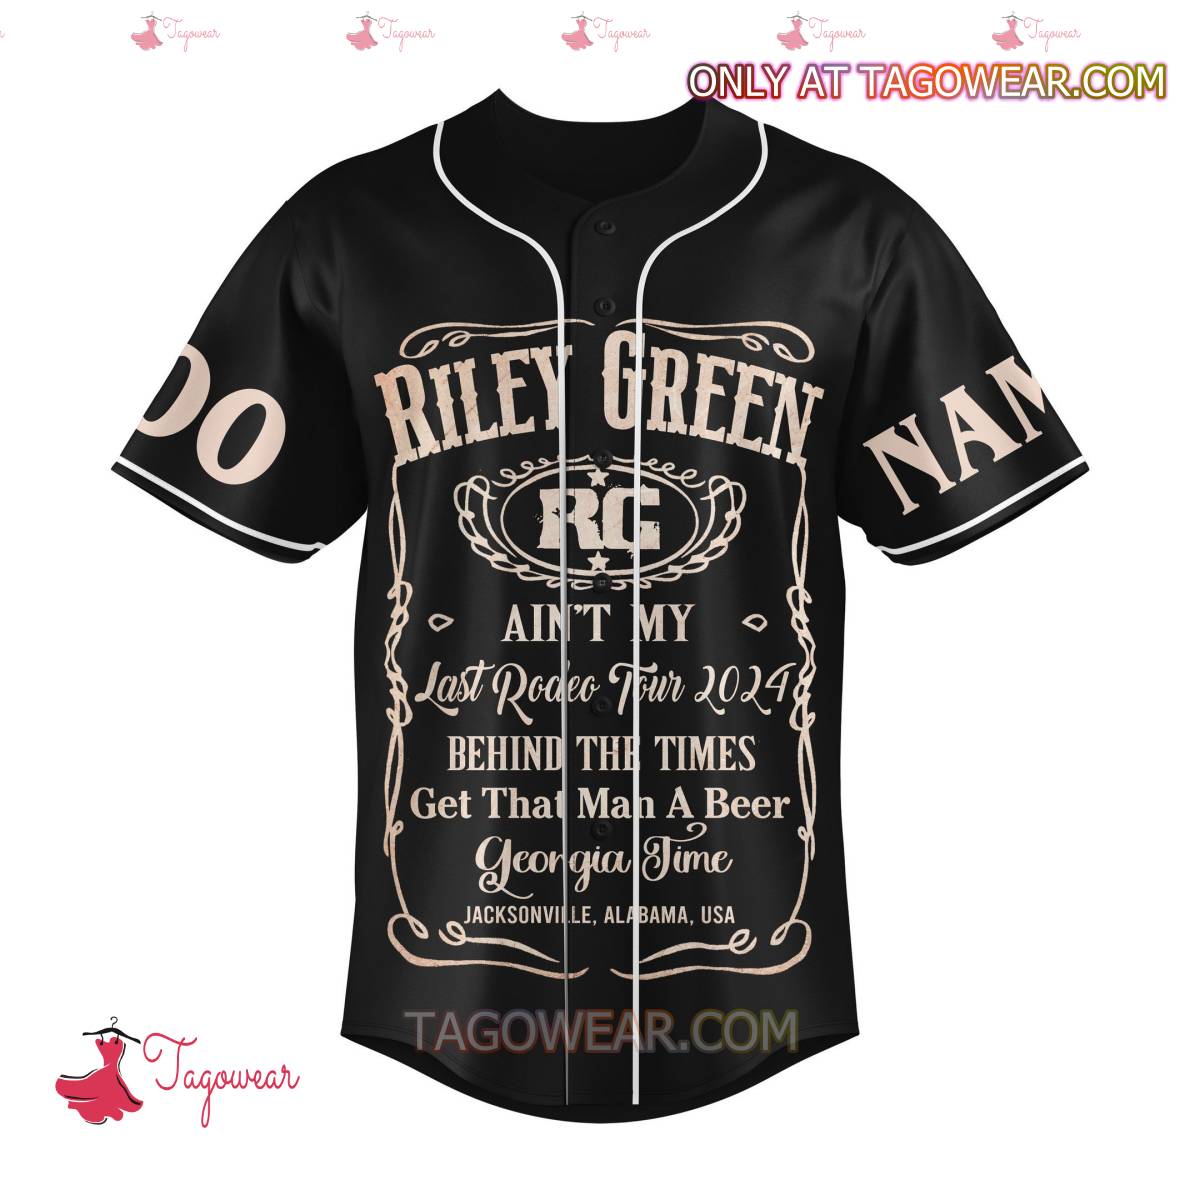 Riley Green Ain't My Last Rodeo Tour Personalized Baseball Jersey a